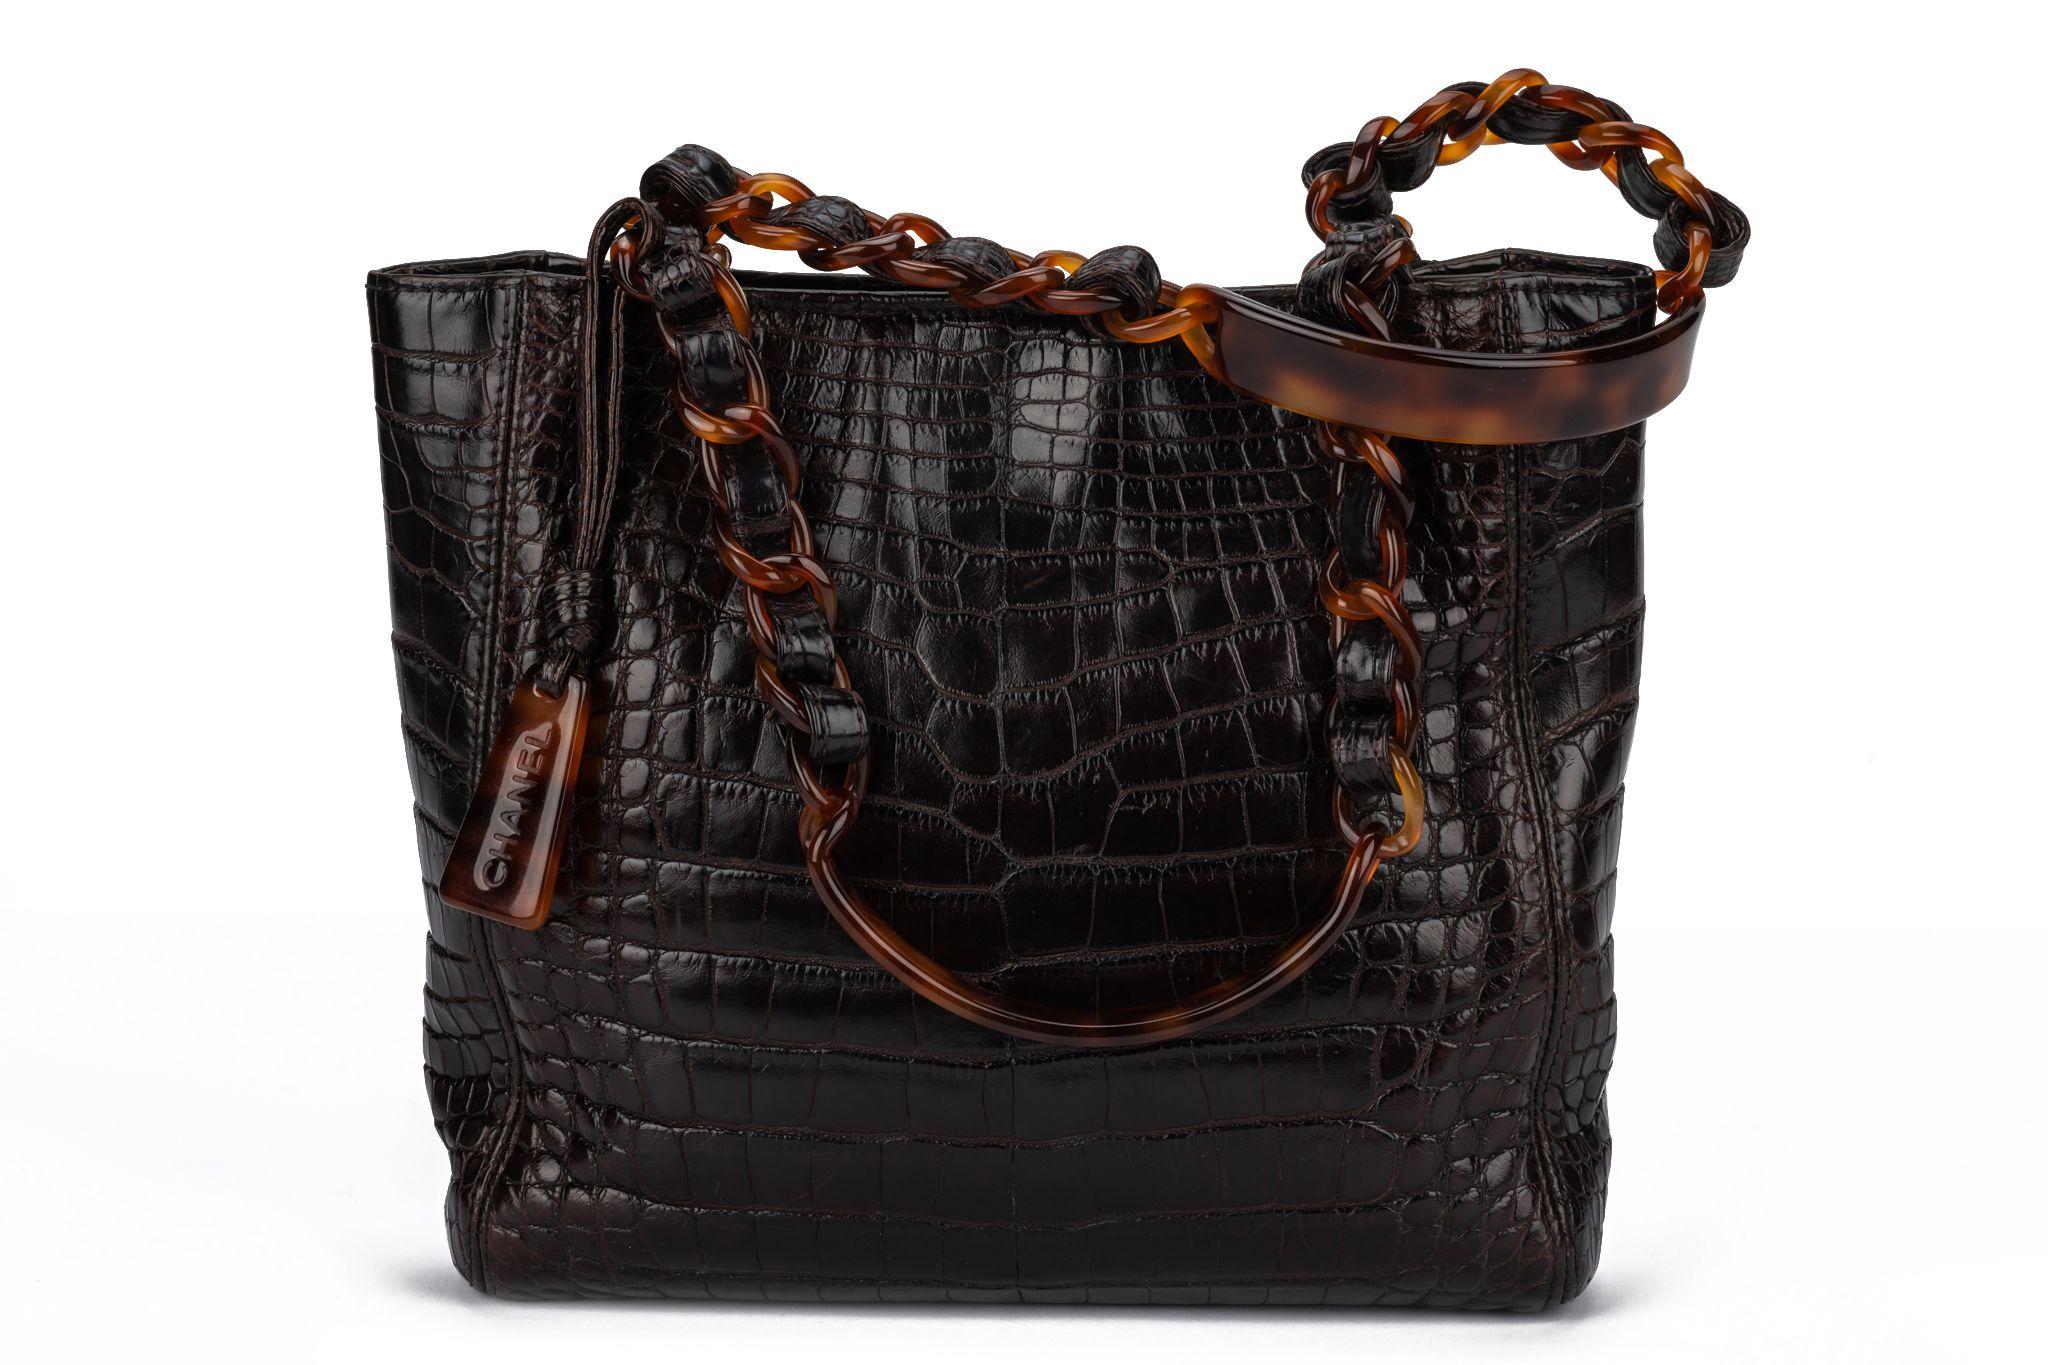 Chanel rare black Alligator faux Tortoise Chain Bag it is from collection 5, 1997/1999. The handles measure 6